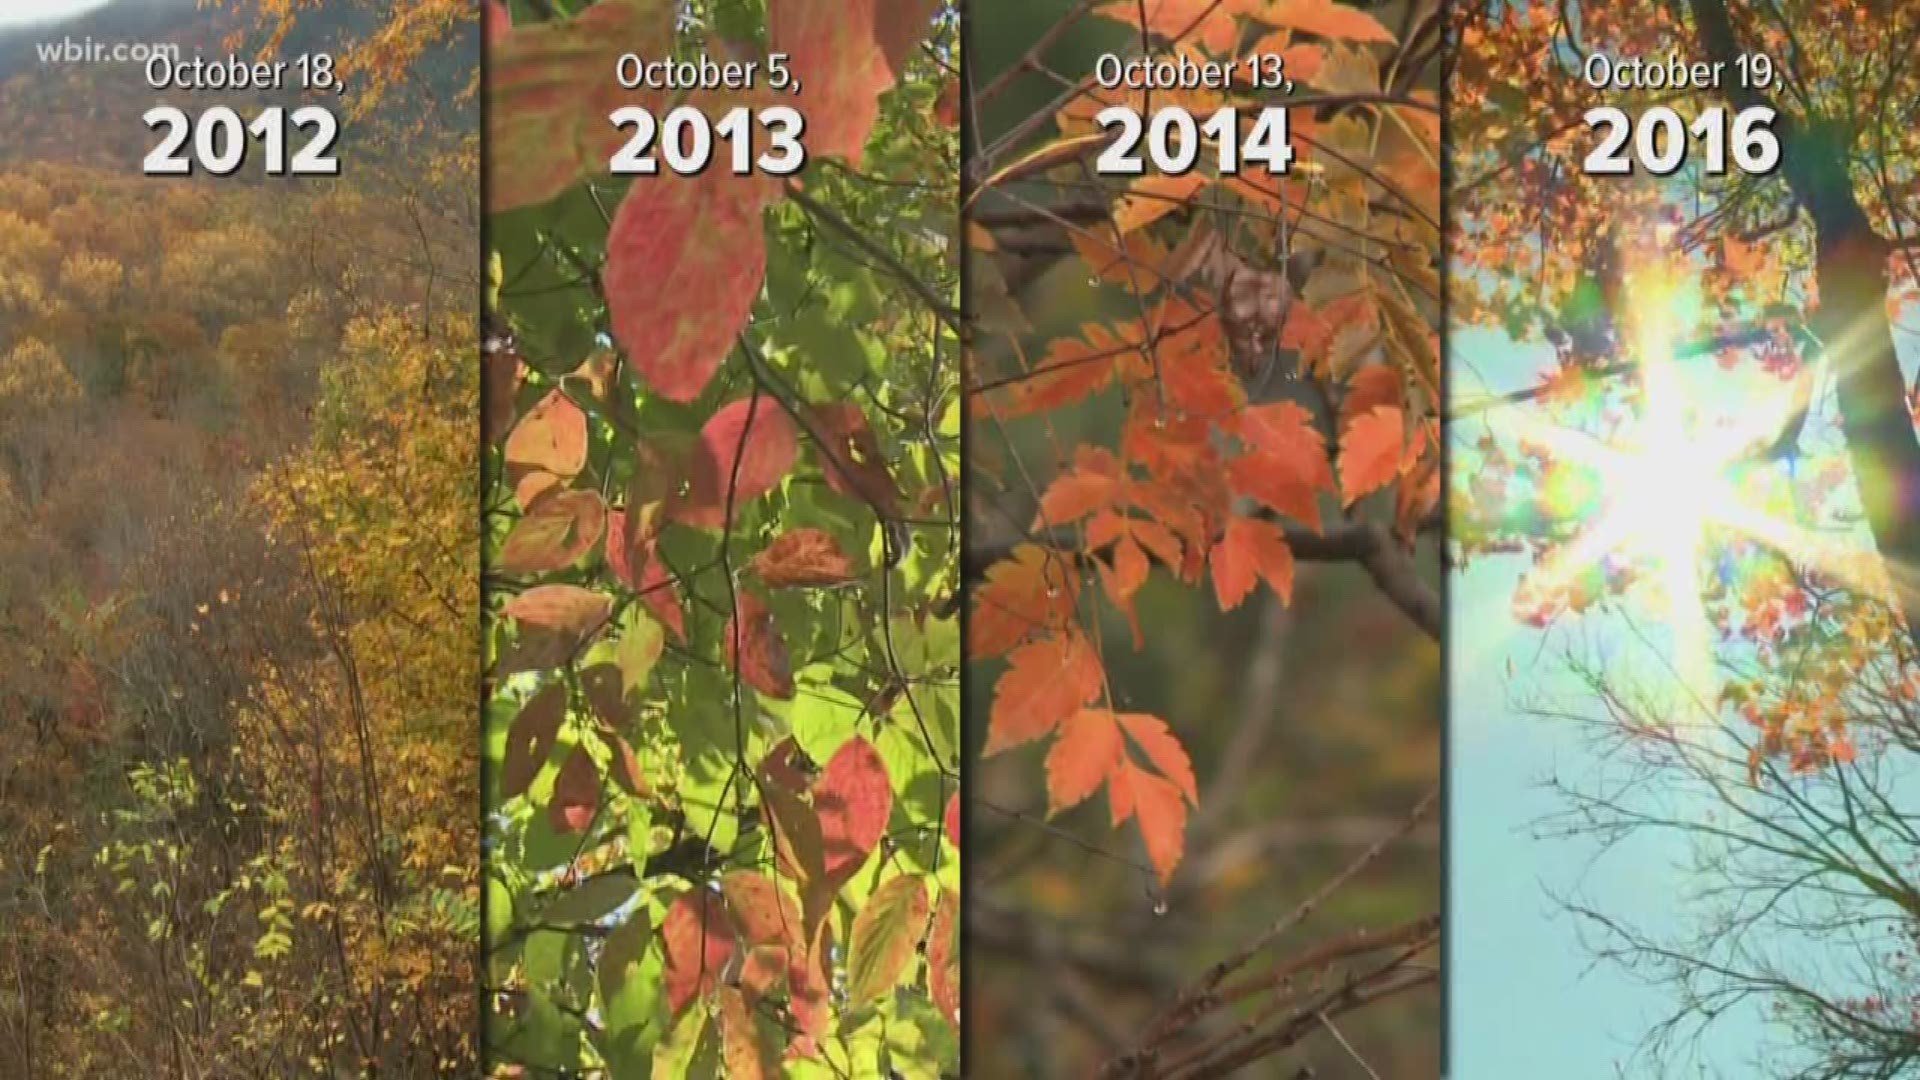 Oct. 15, 2018: Rarely has fall foliage been remained so green in mid-October as 2018. We dig into the archives to compare the colors we normally see this time of year.